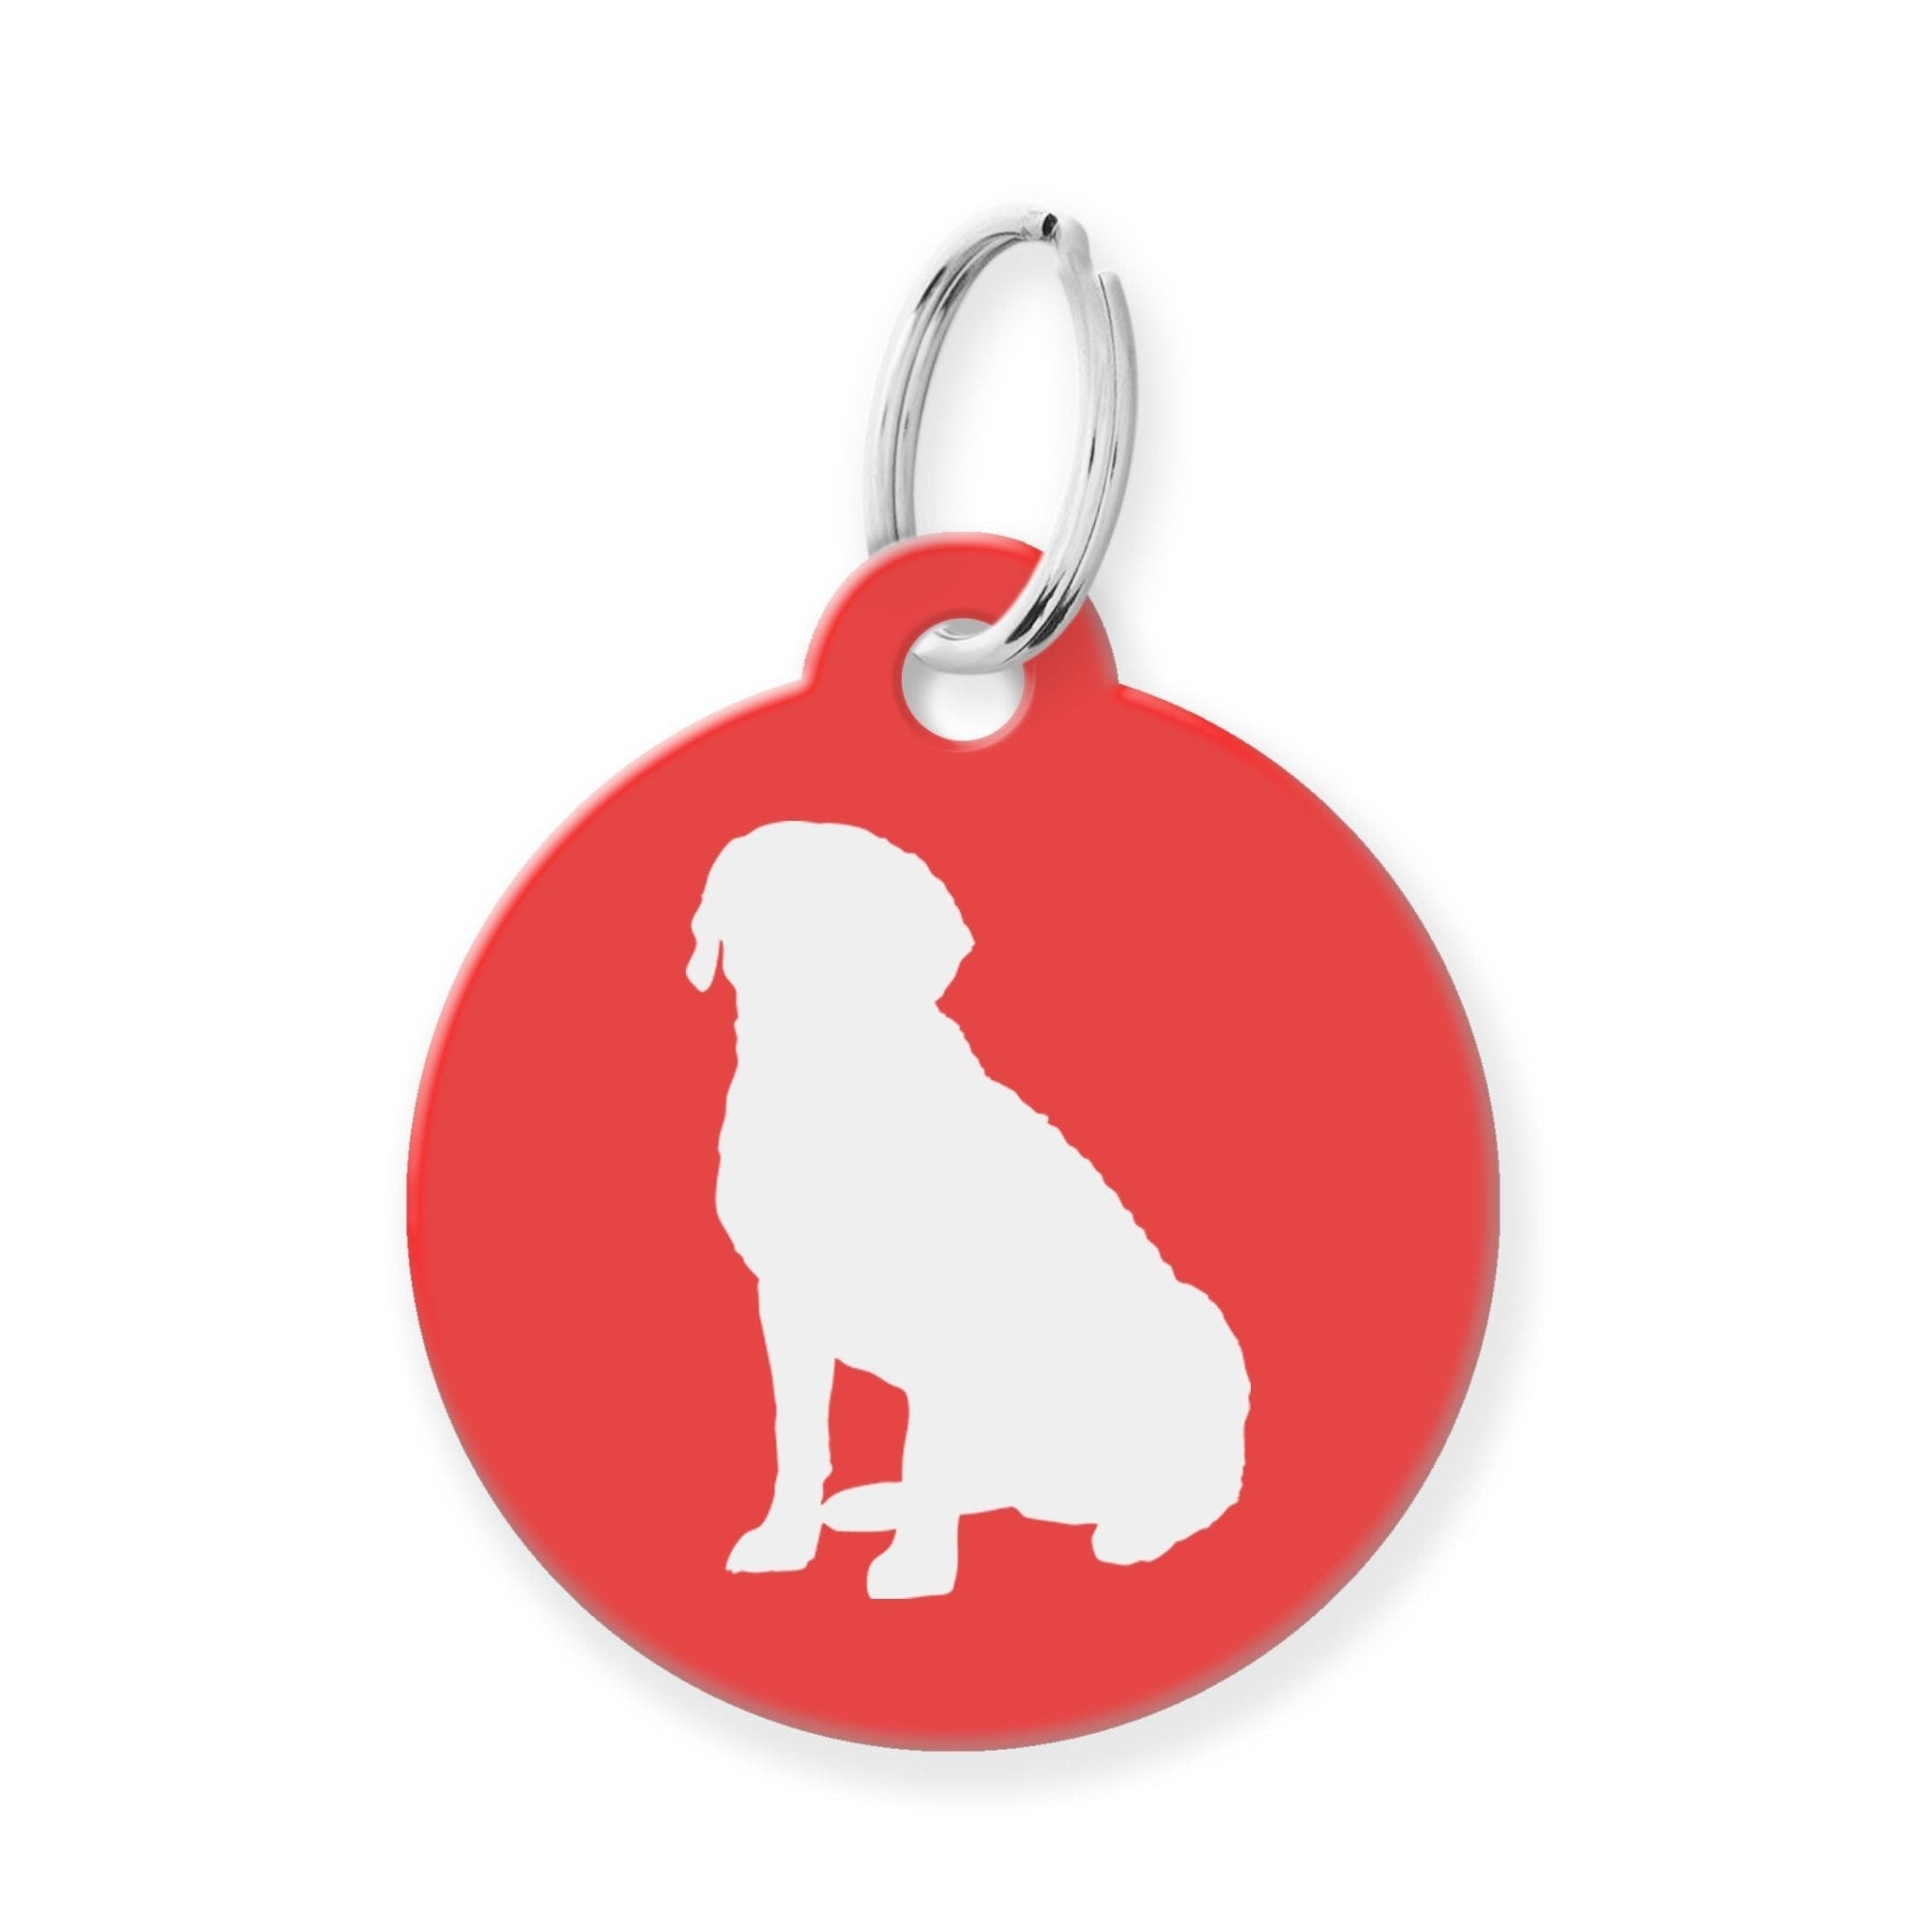 Labrador Silhouette Pet Tag - The Barking Mutt